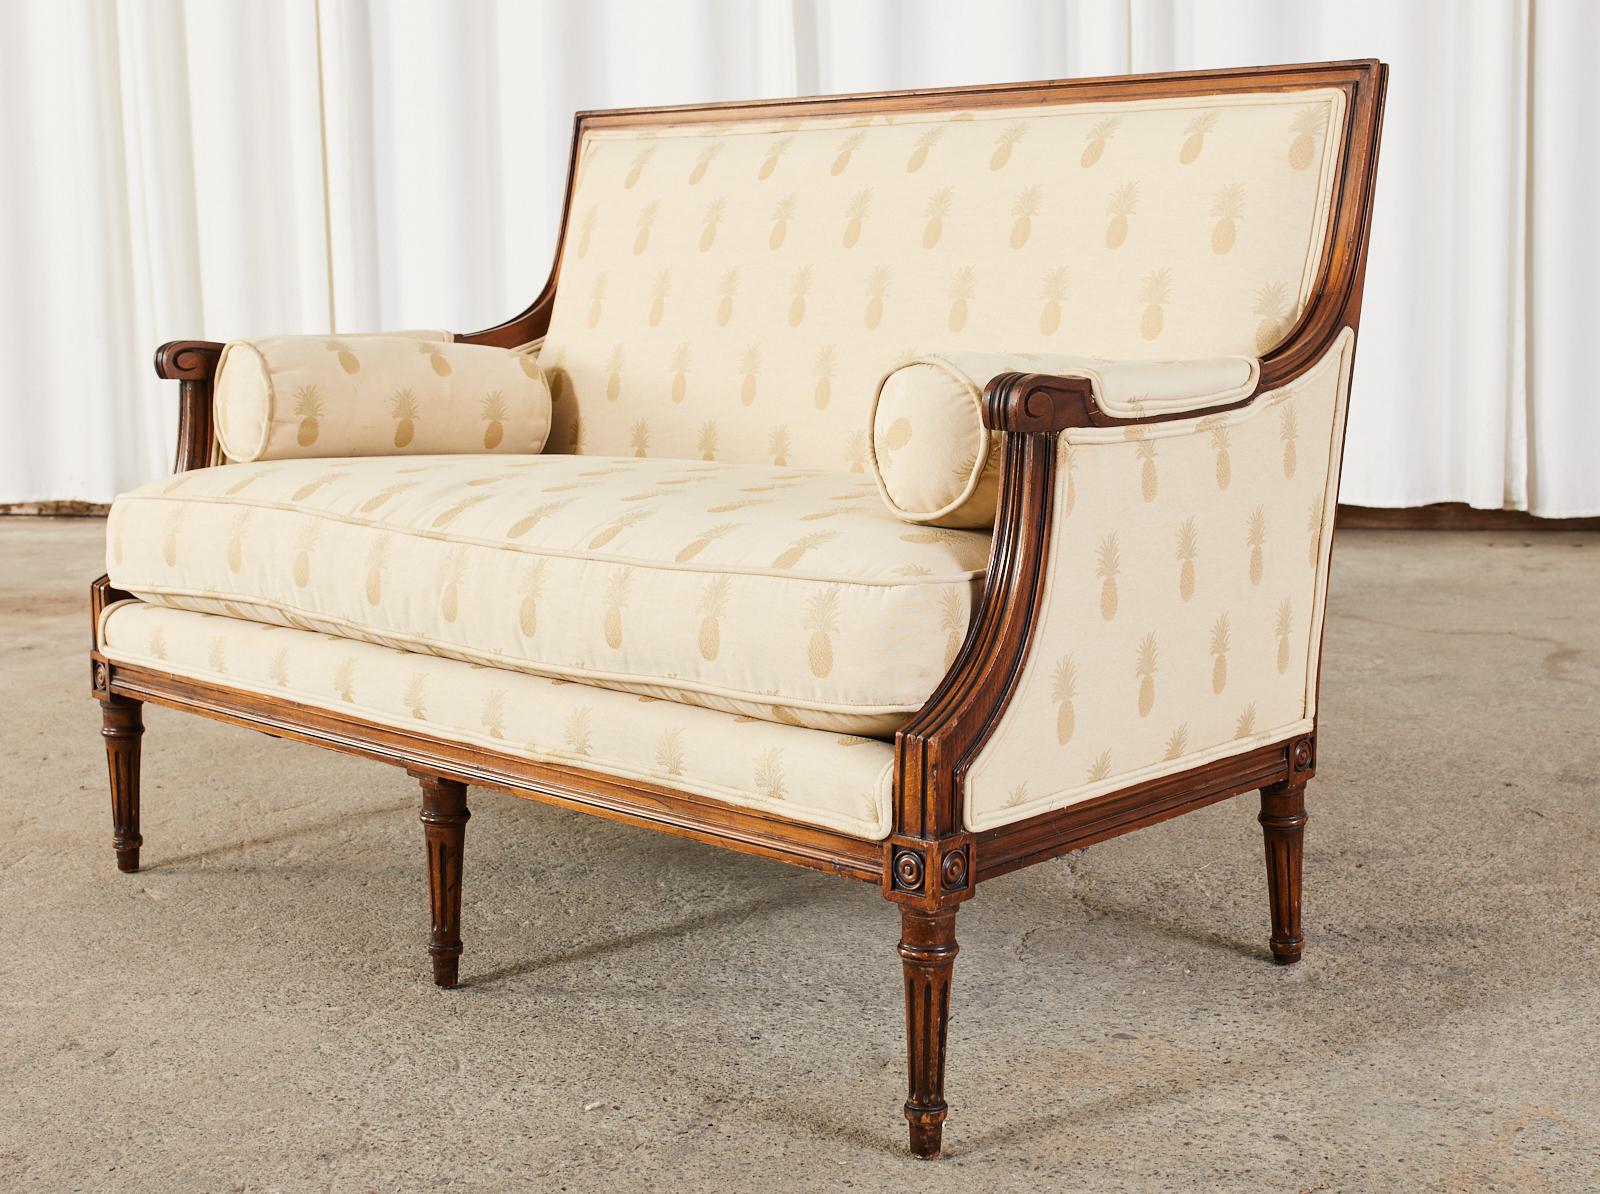 Handsome French Louis XVI style settee canape with a beautifully carved frame. The settee features a Tommy Bahama style cream colored upholstery with a Caribbean pineapple motif. The square back, molded frame has gracefully curved padded arms